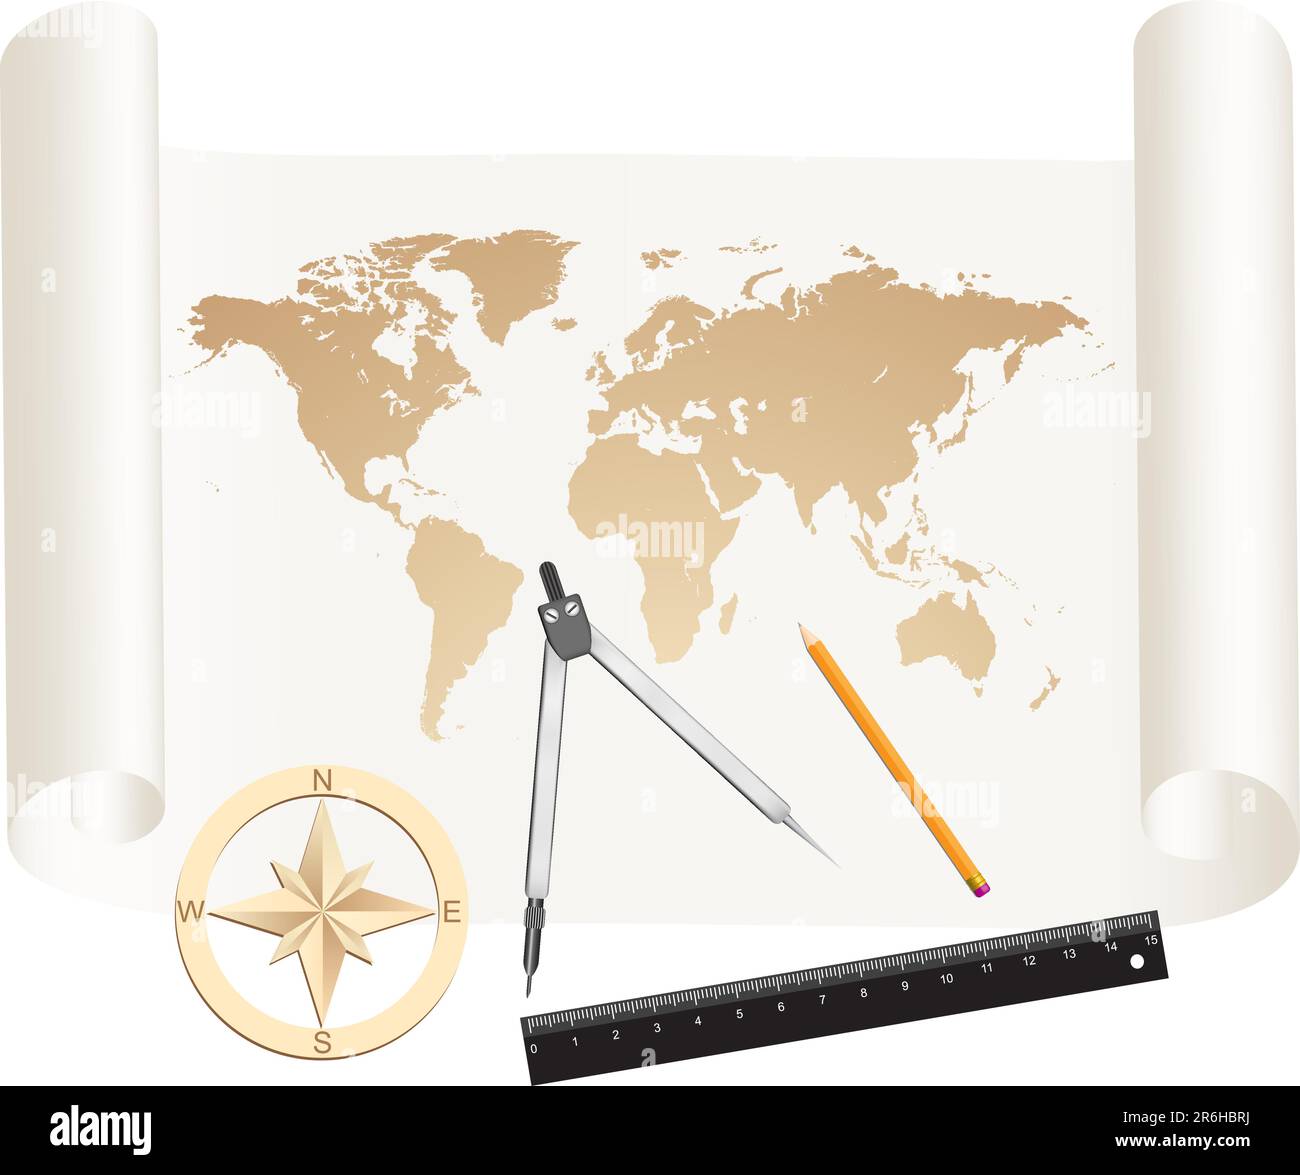 Measuring tools a compasses, a pencil and a ruler lie on a roll of paper with world map drawing Stock Vector